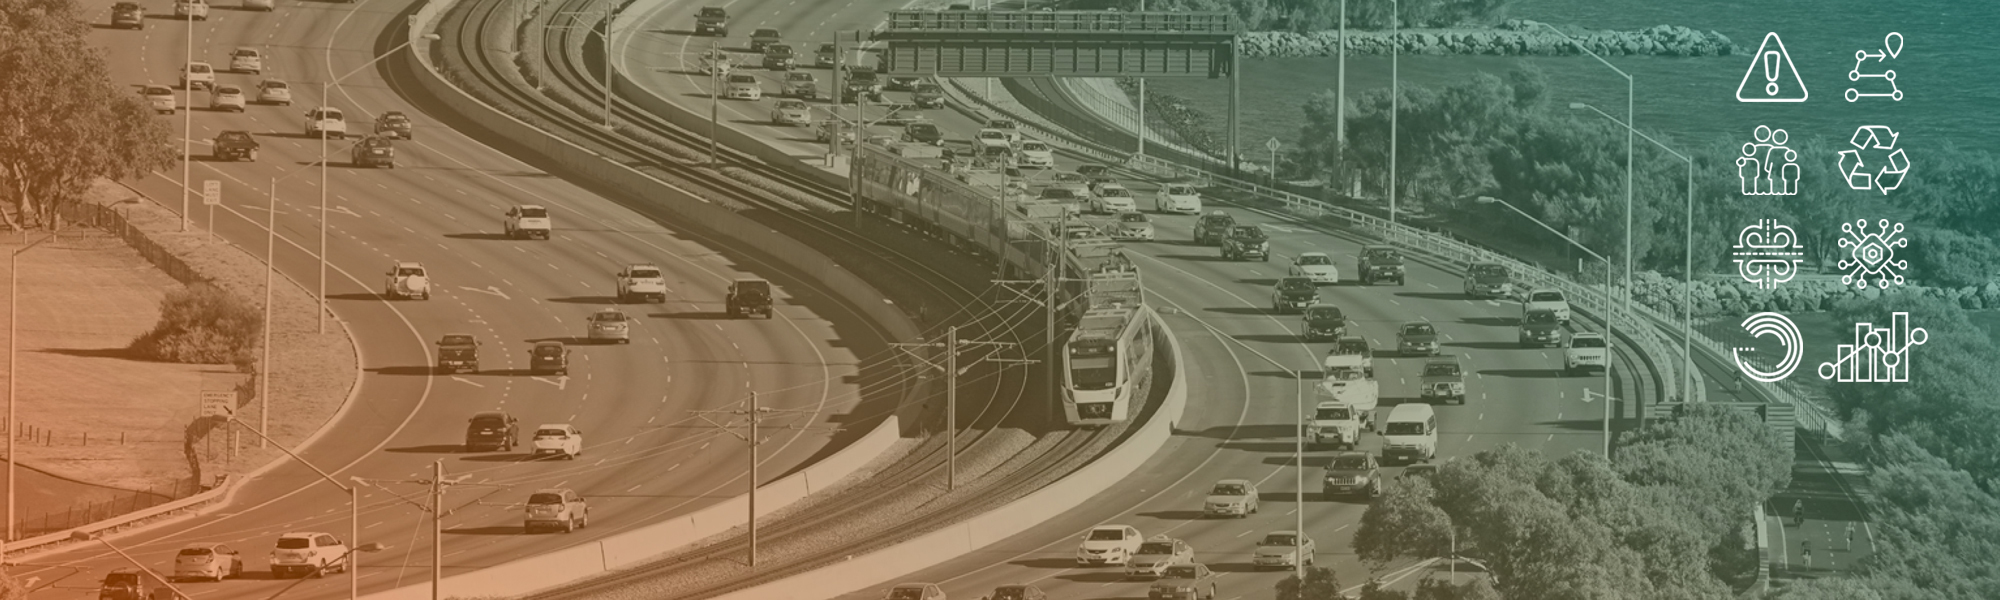 Austroads: Transport Research and Trends header image 1